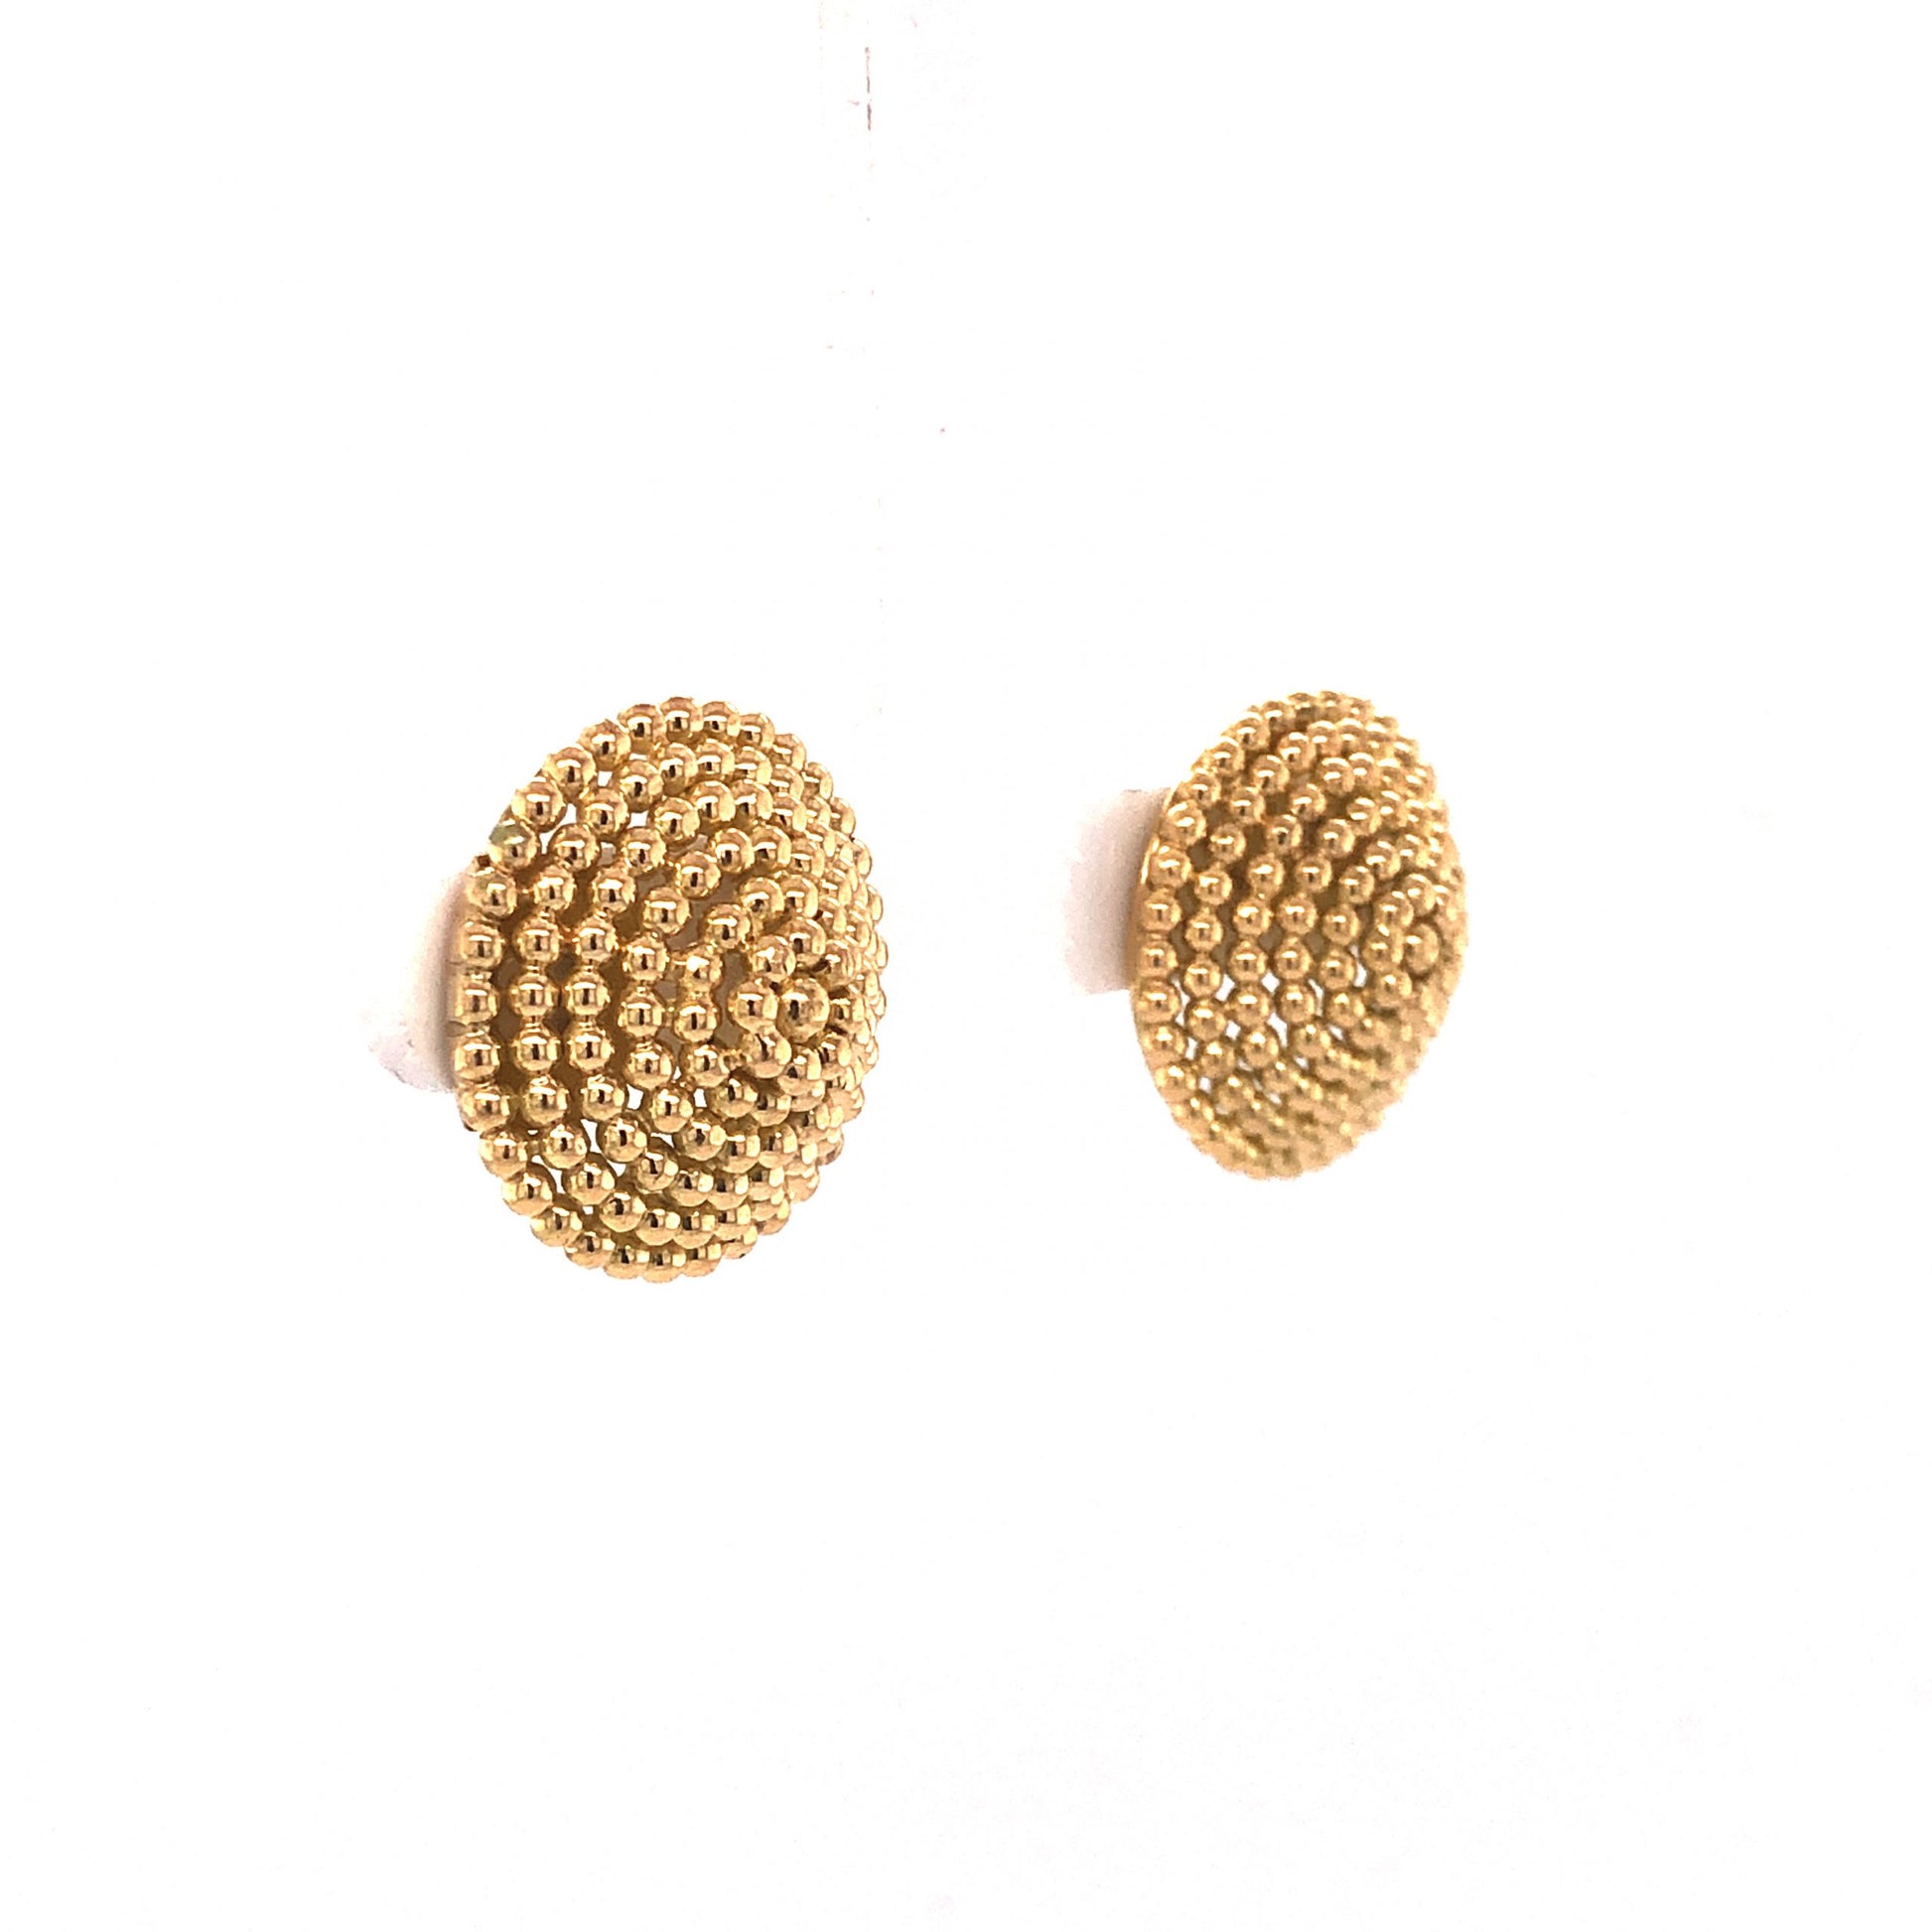 Round Rope Stud Earrings in 14k Yellow GoldComposition: 14 Karat Yellow GoldTotal Gram Weight: 14.3 g